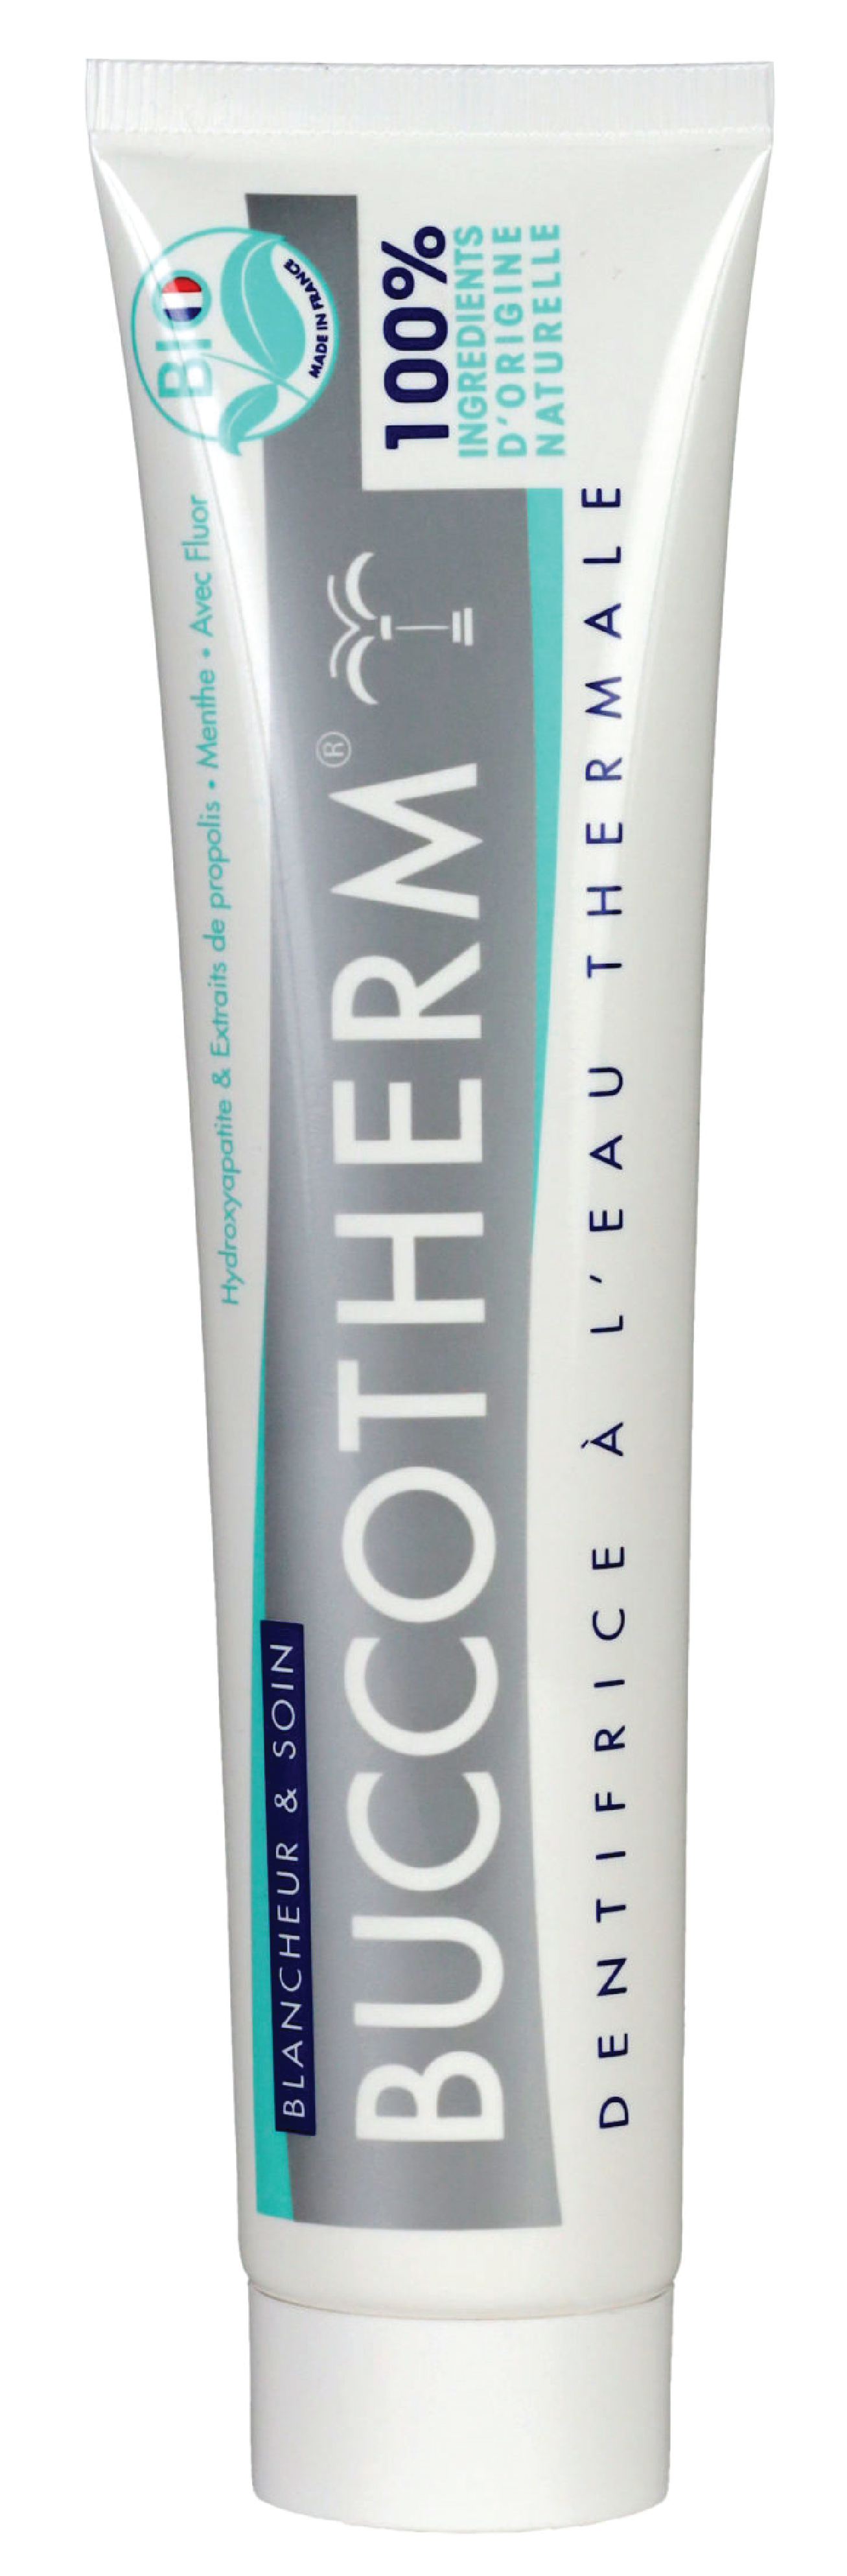 Buccotherm Whitening & Care Toothpaste Organic Certified - 75 ml